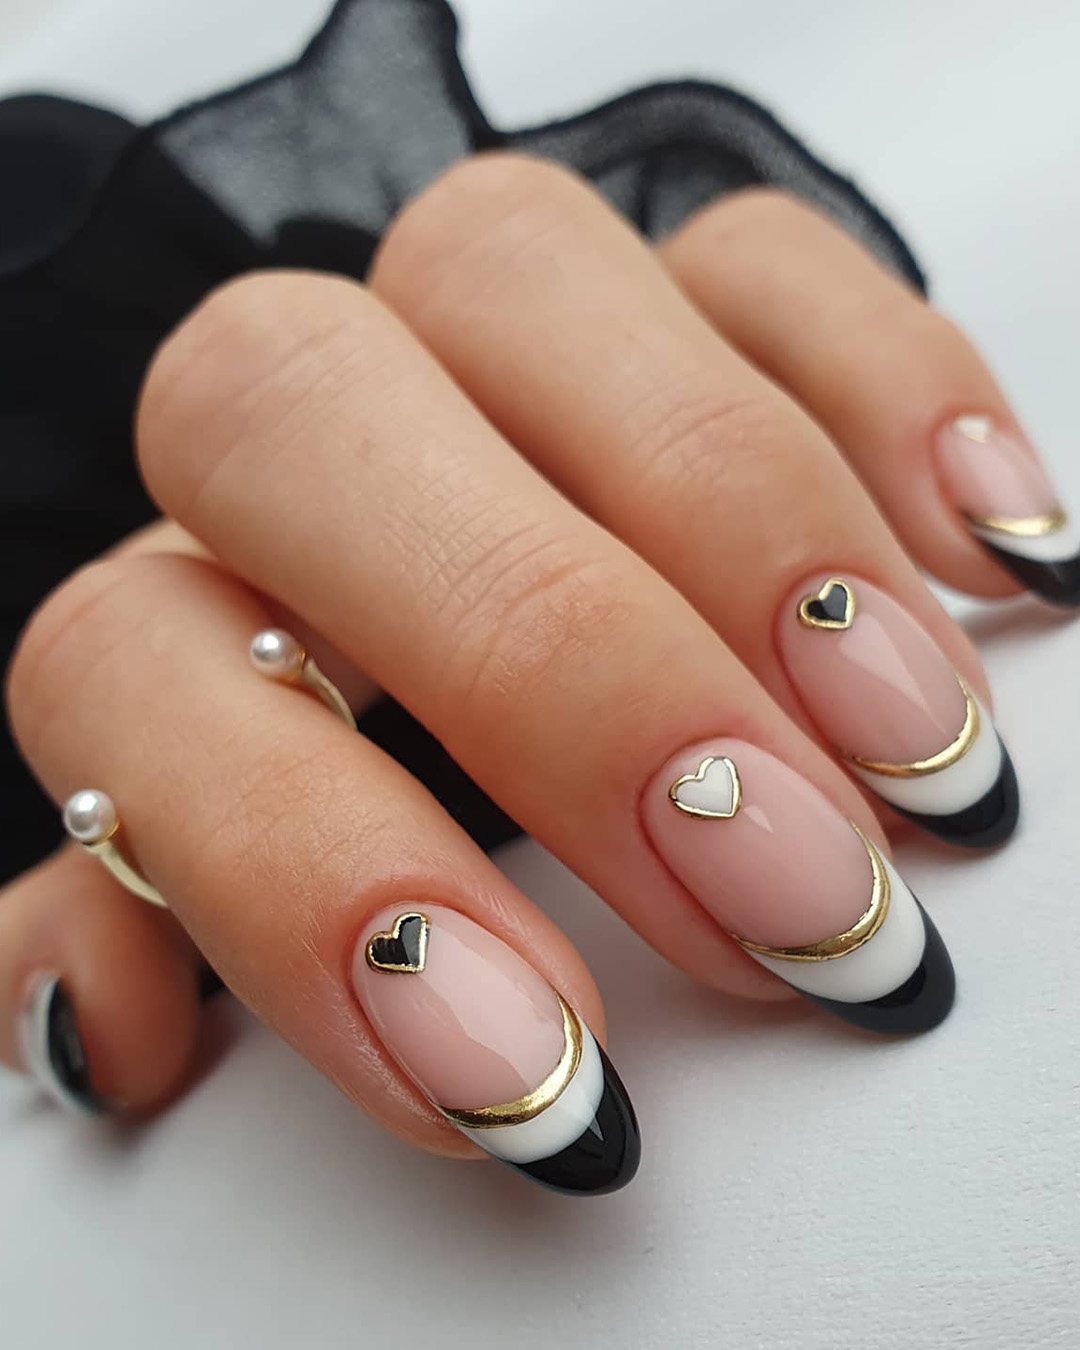 black wedding nails with white heart shaped paint thehotblend